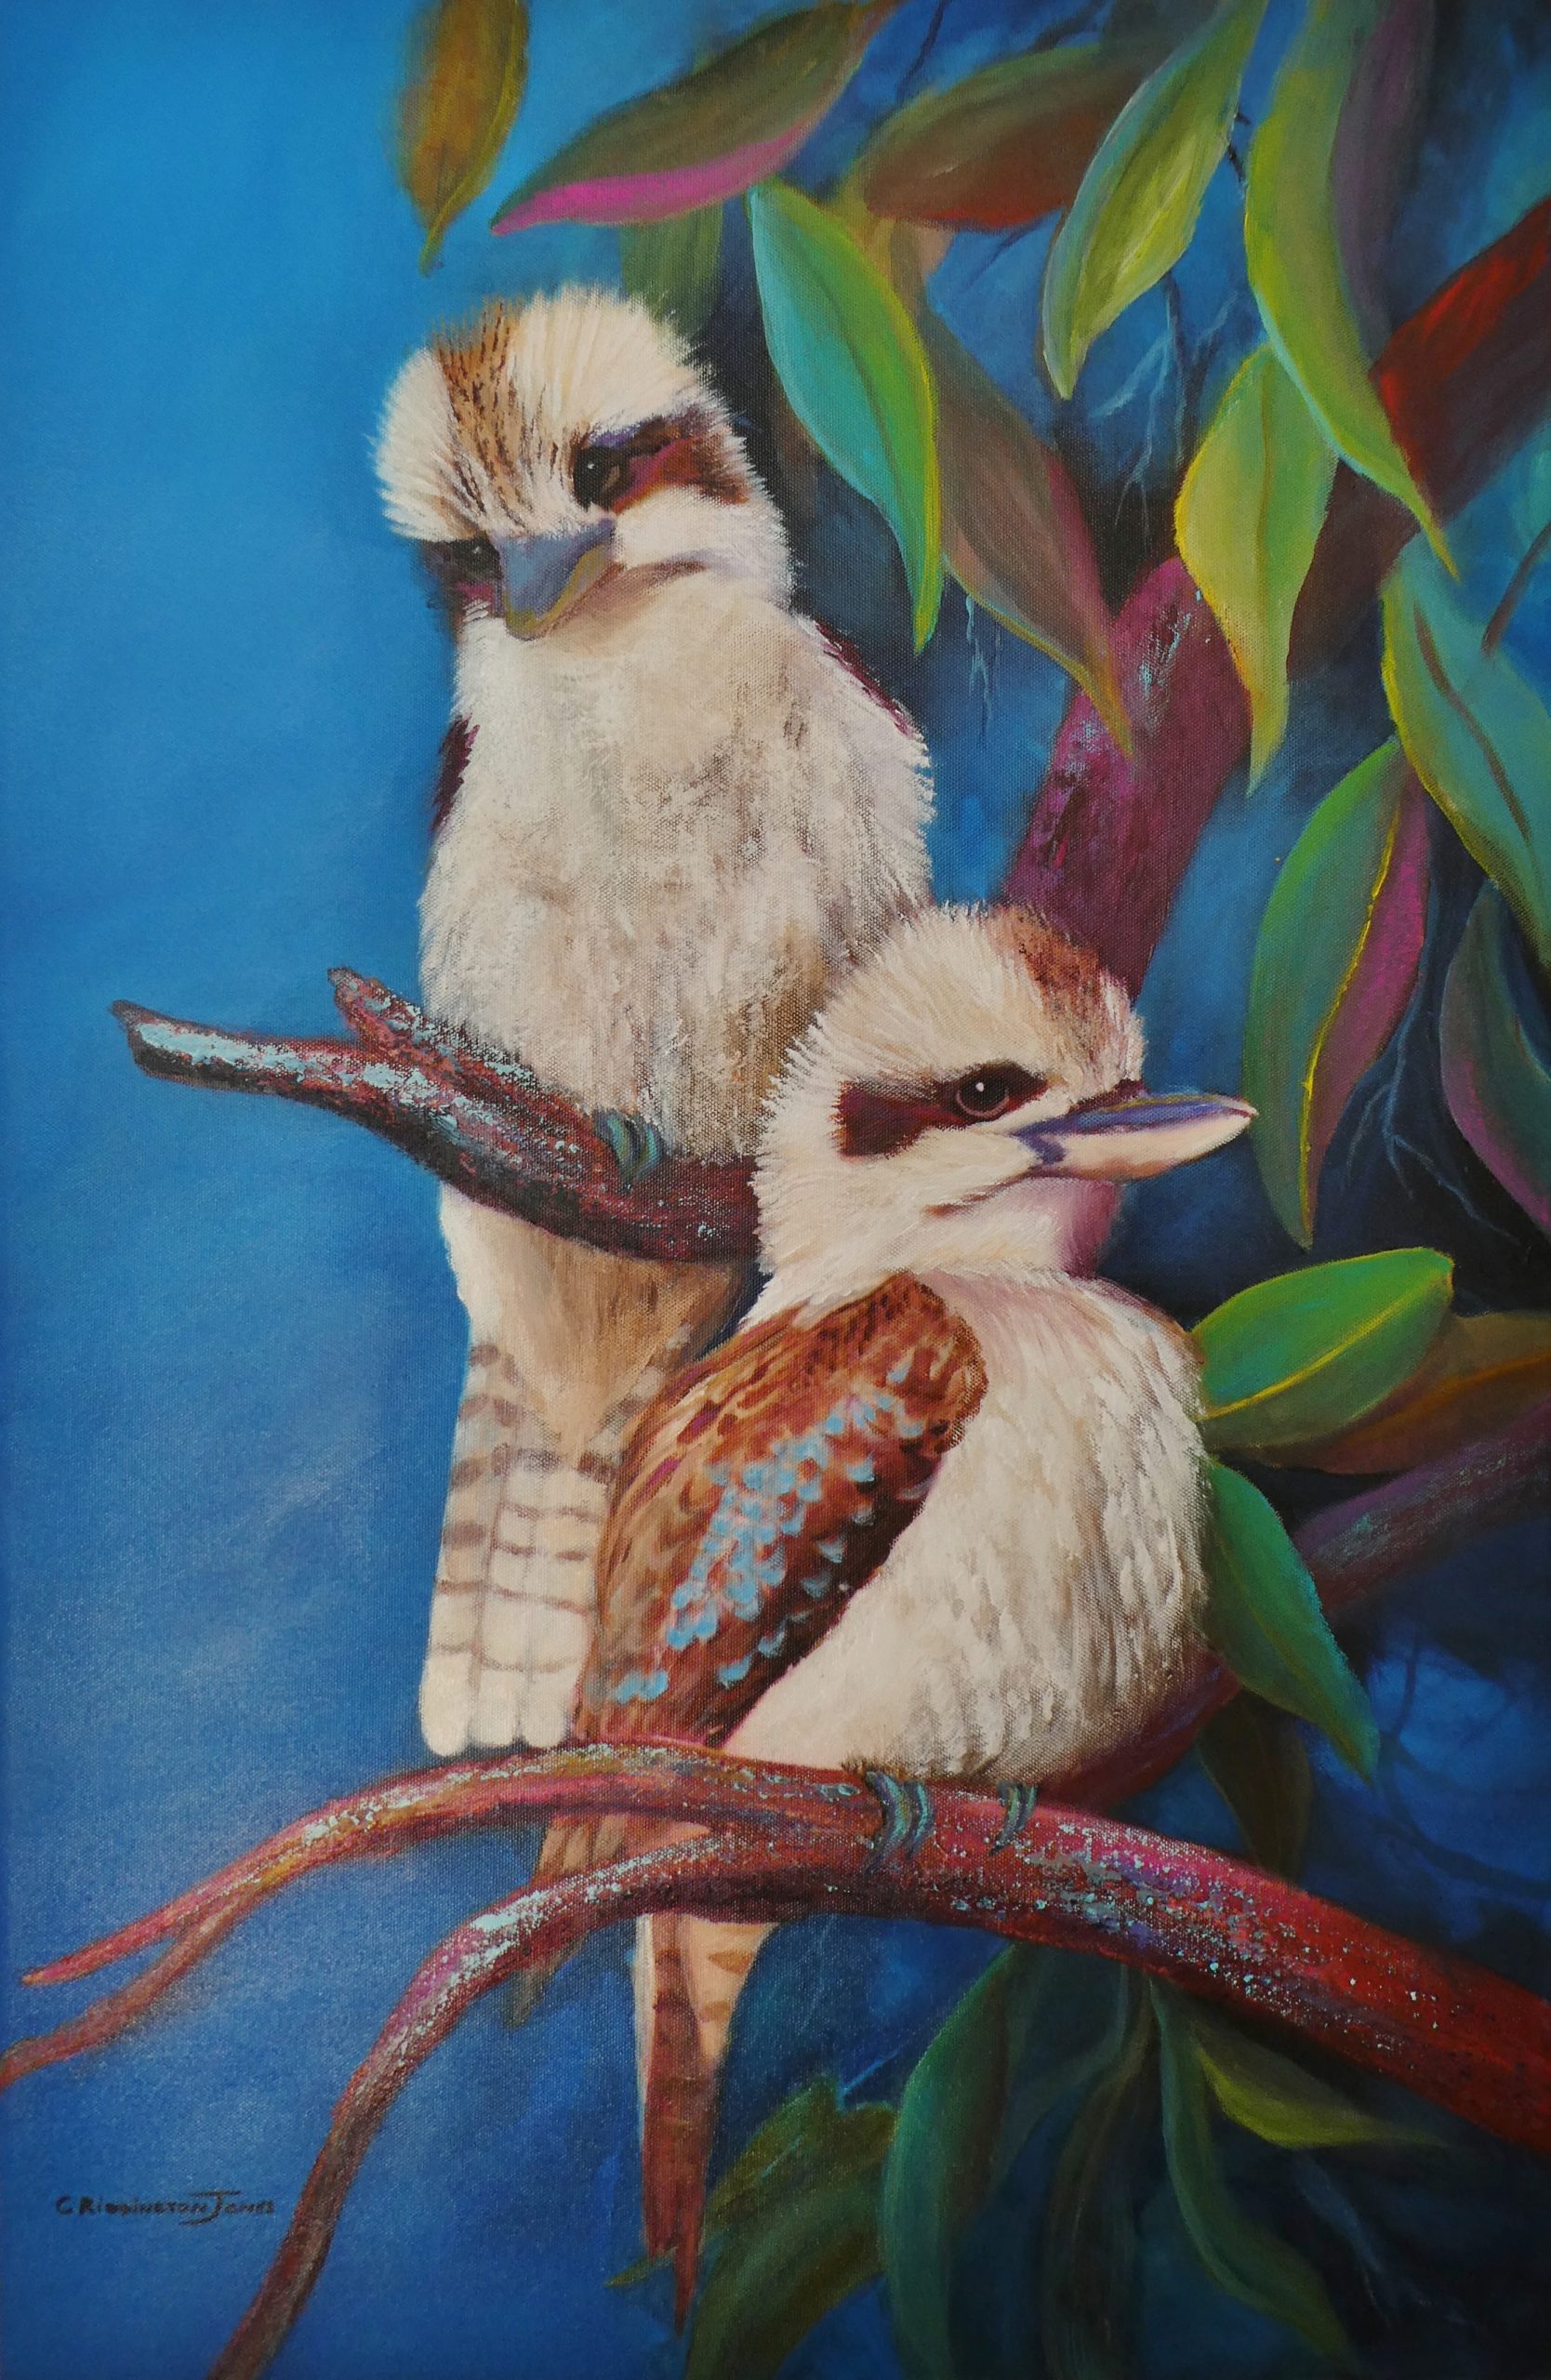 painting of two kookaburras on branches in tree